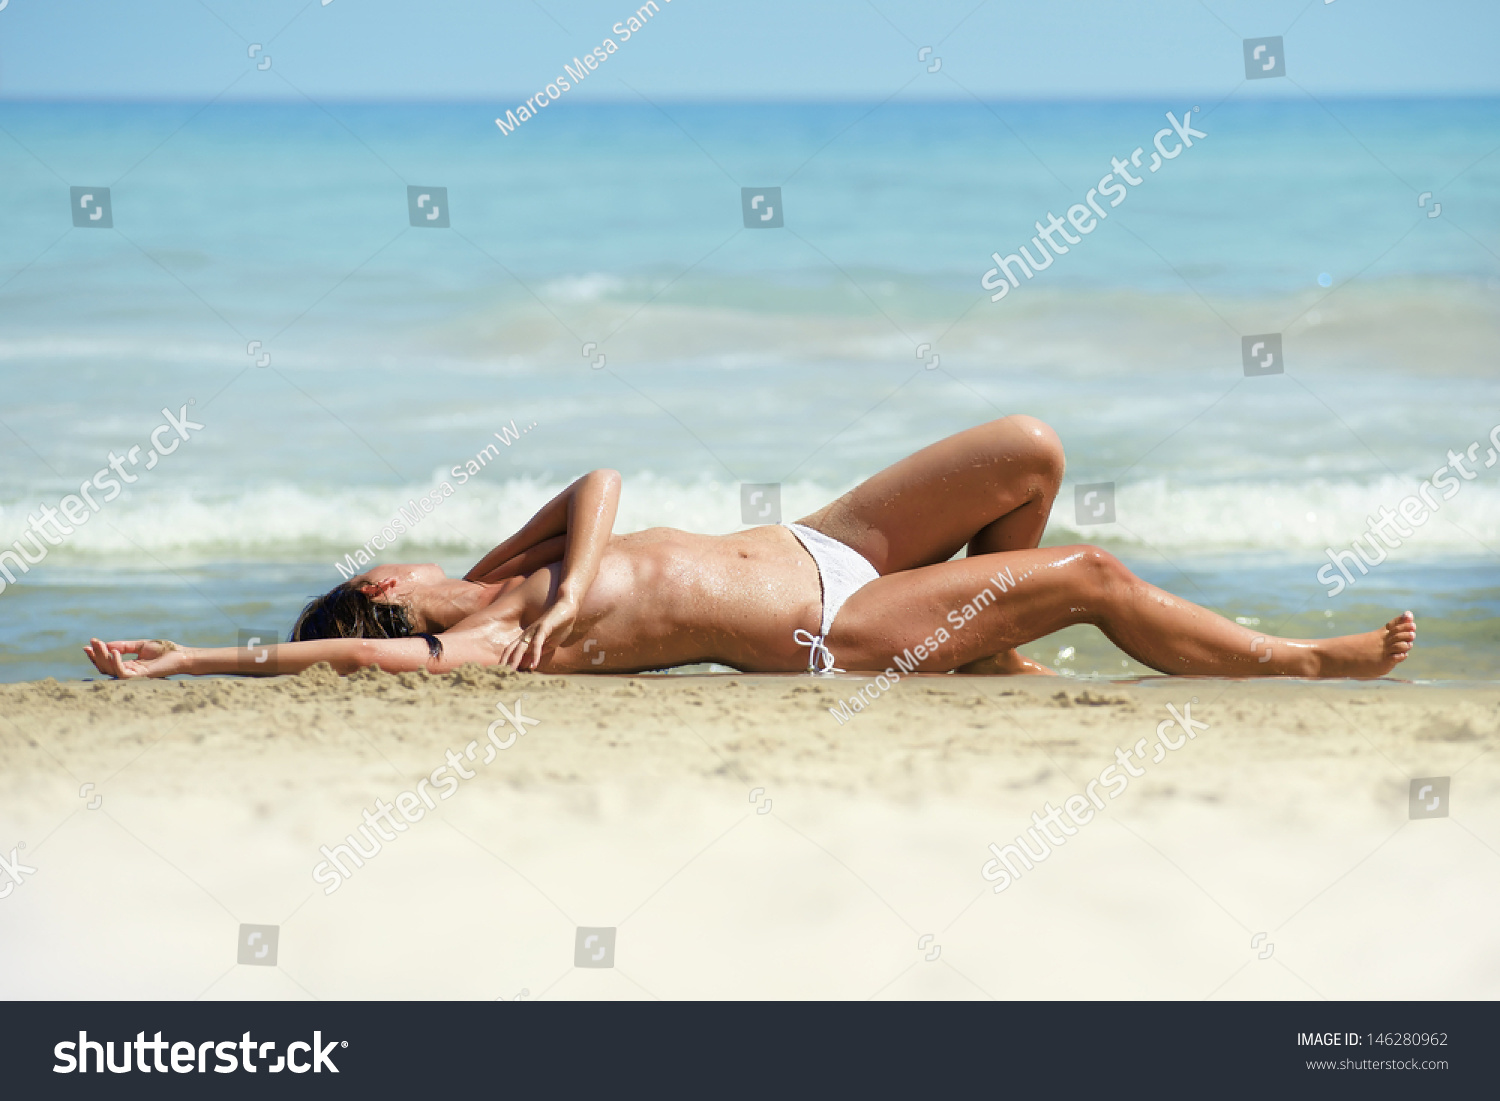 Tanned Topless Woman Lying Sand Wearing Stock Photo